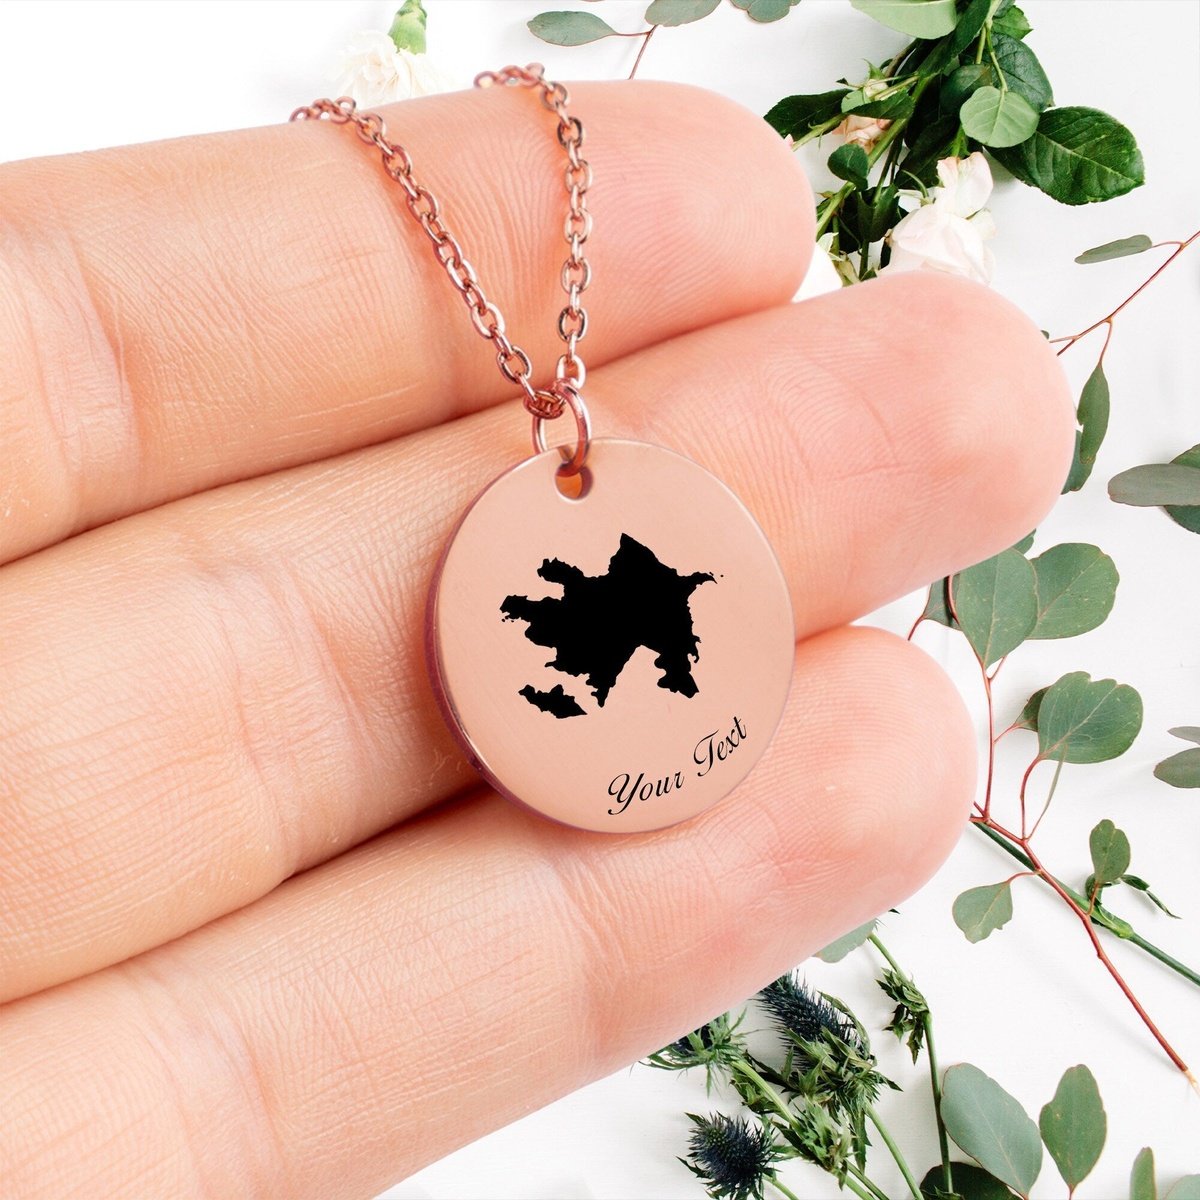 Azerbaijan Country Map Necklace, Your Name Necklace, Minimalist Necklace, Personalized Gift, Silver Necklace, Gift For Him Her